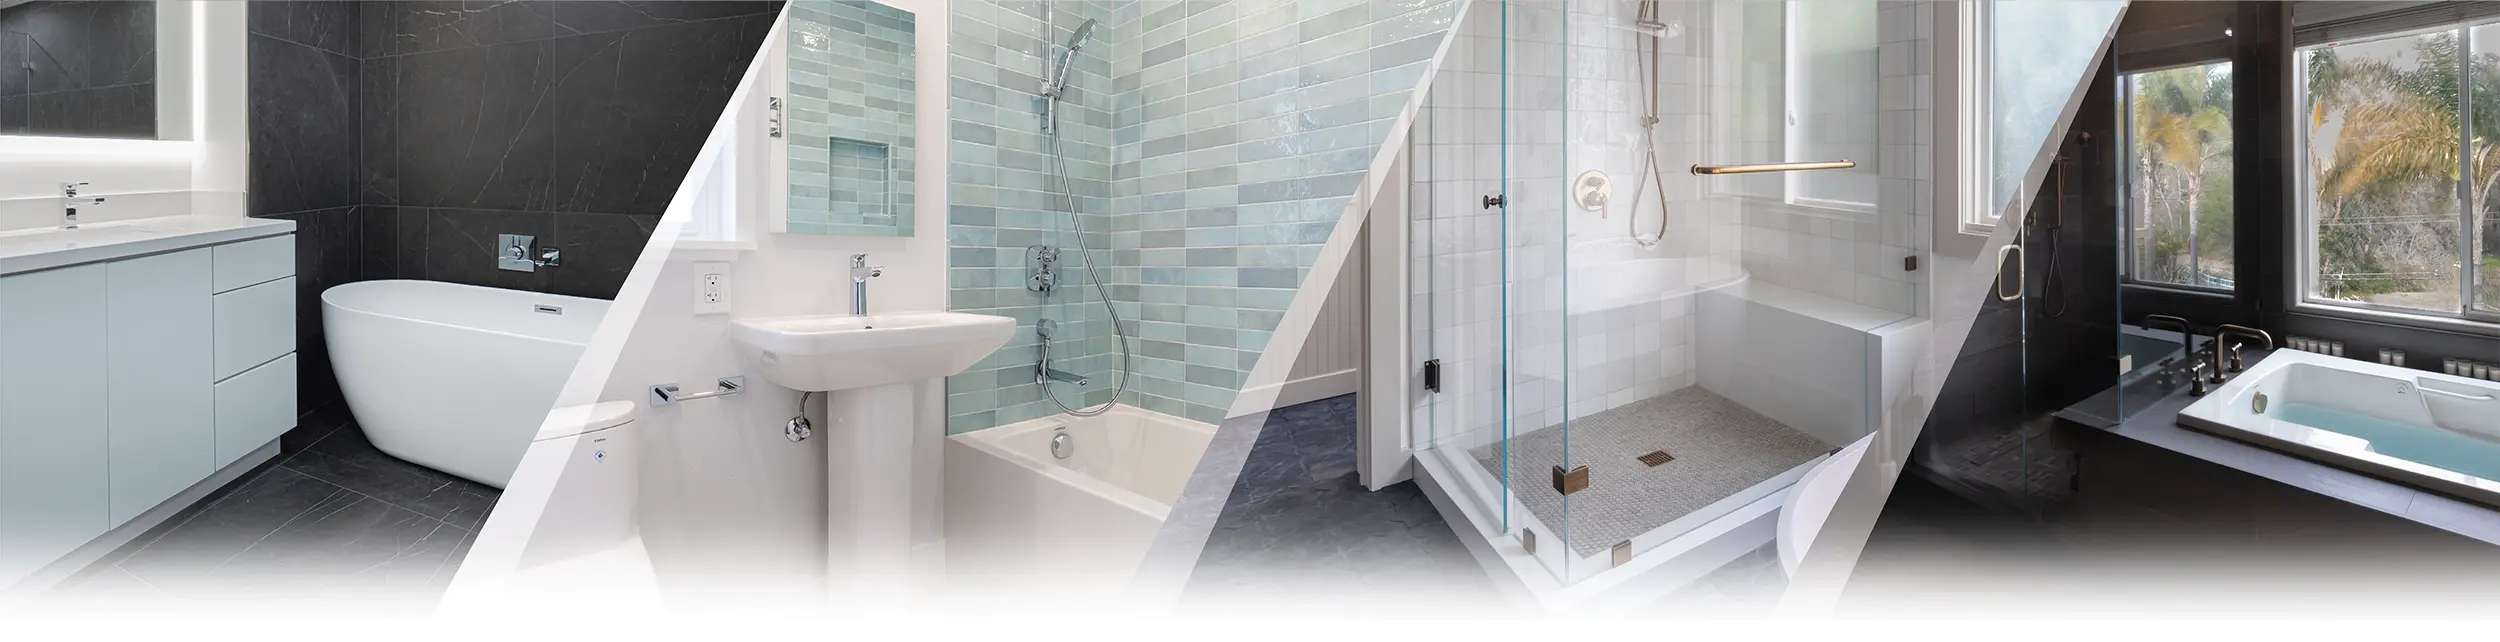 Bathroom remodeling services by Wise Builders in California